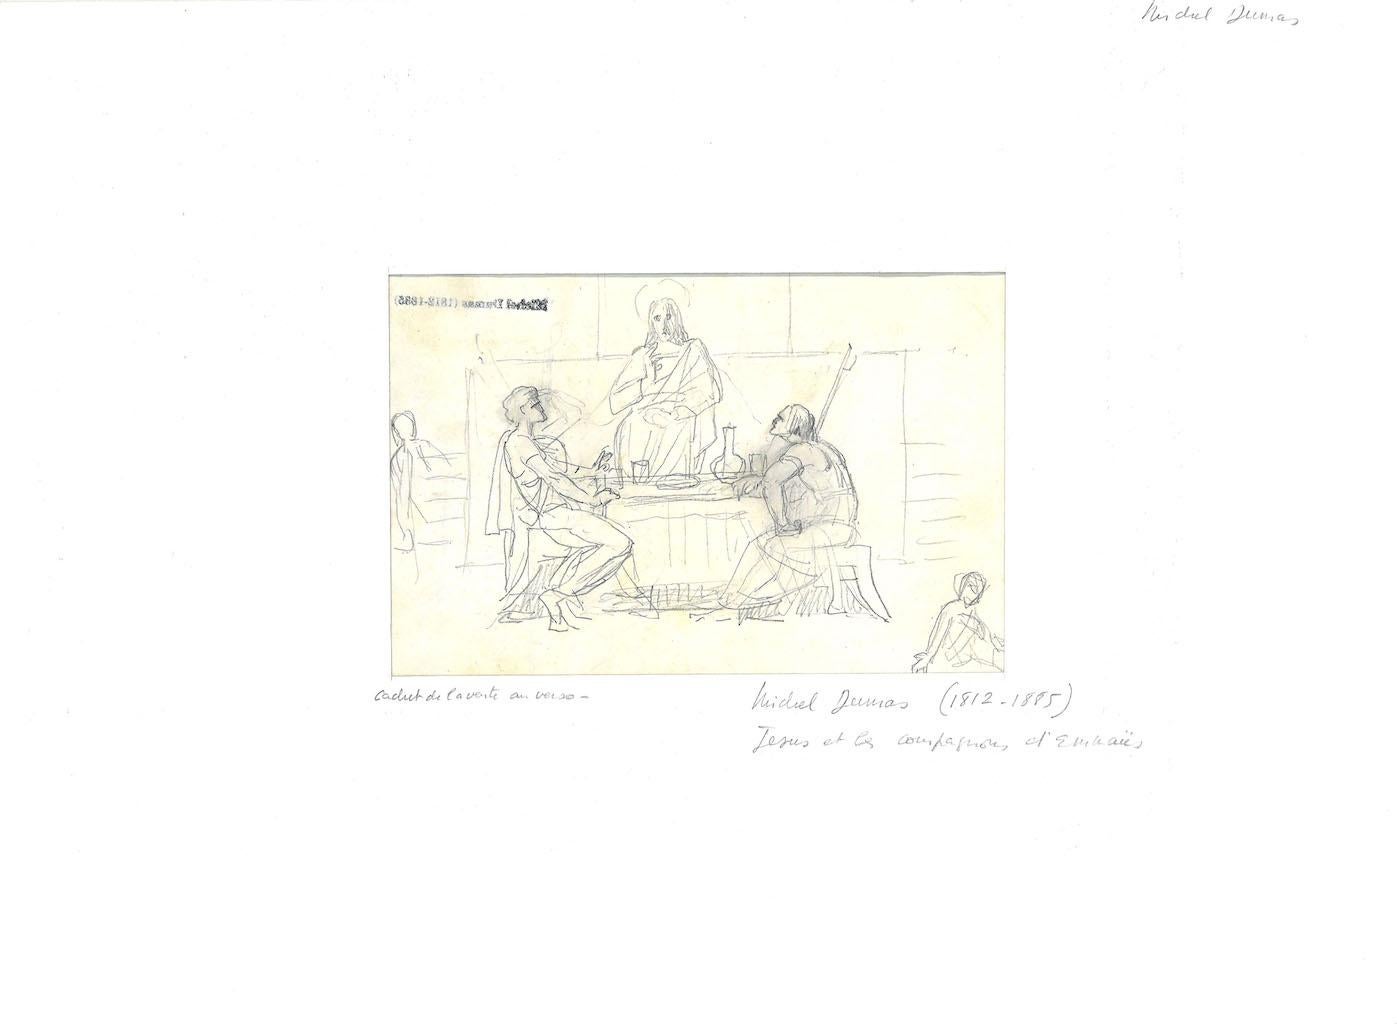 Religious Scene is original drawings in pencil on paper realized by Michel Dumas (1812-1885), with the stamp of the artist at the top left.

Included a Passepartout: 28 x 39 cm

In good condition, aged, with some cutting at the top.

The artwork